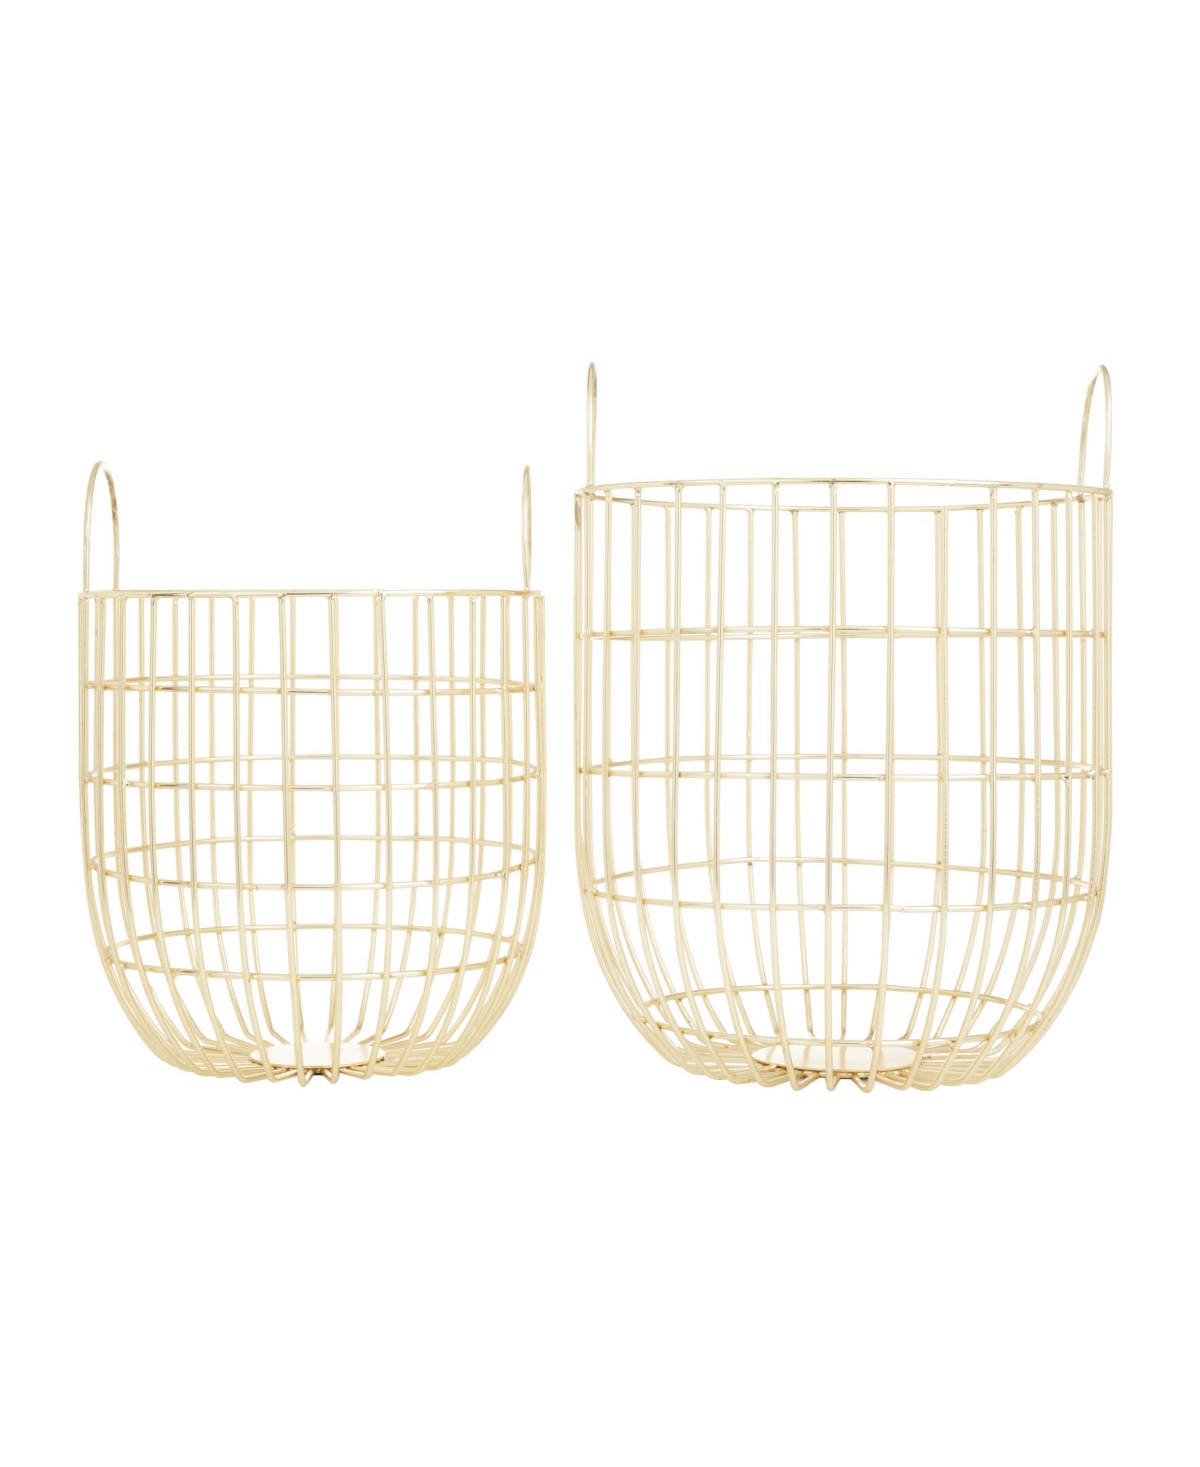 Rosemary Lane Contemporary Storage Baskets, Set Of 2 In Gold-tone